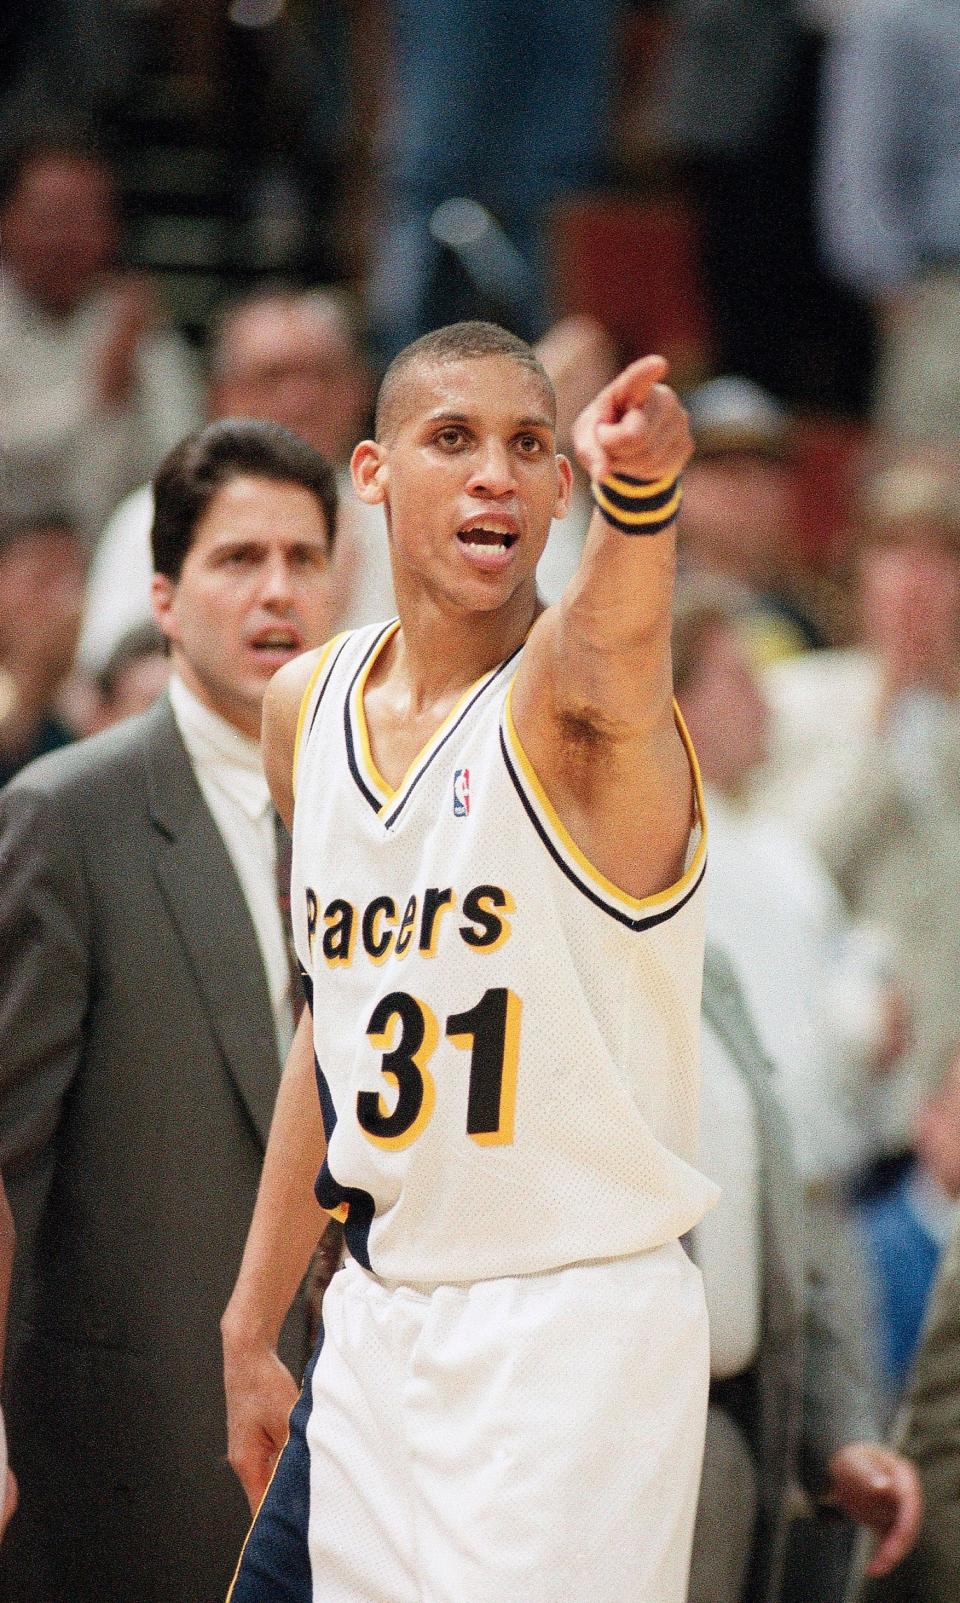 When asked for his favorite trash talk moment, Reggie Miller laughed and then said it was all of them. Because, in his recollection, he always came out on top. "I pretty much have always had the last word."